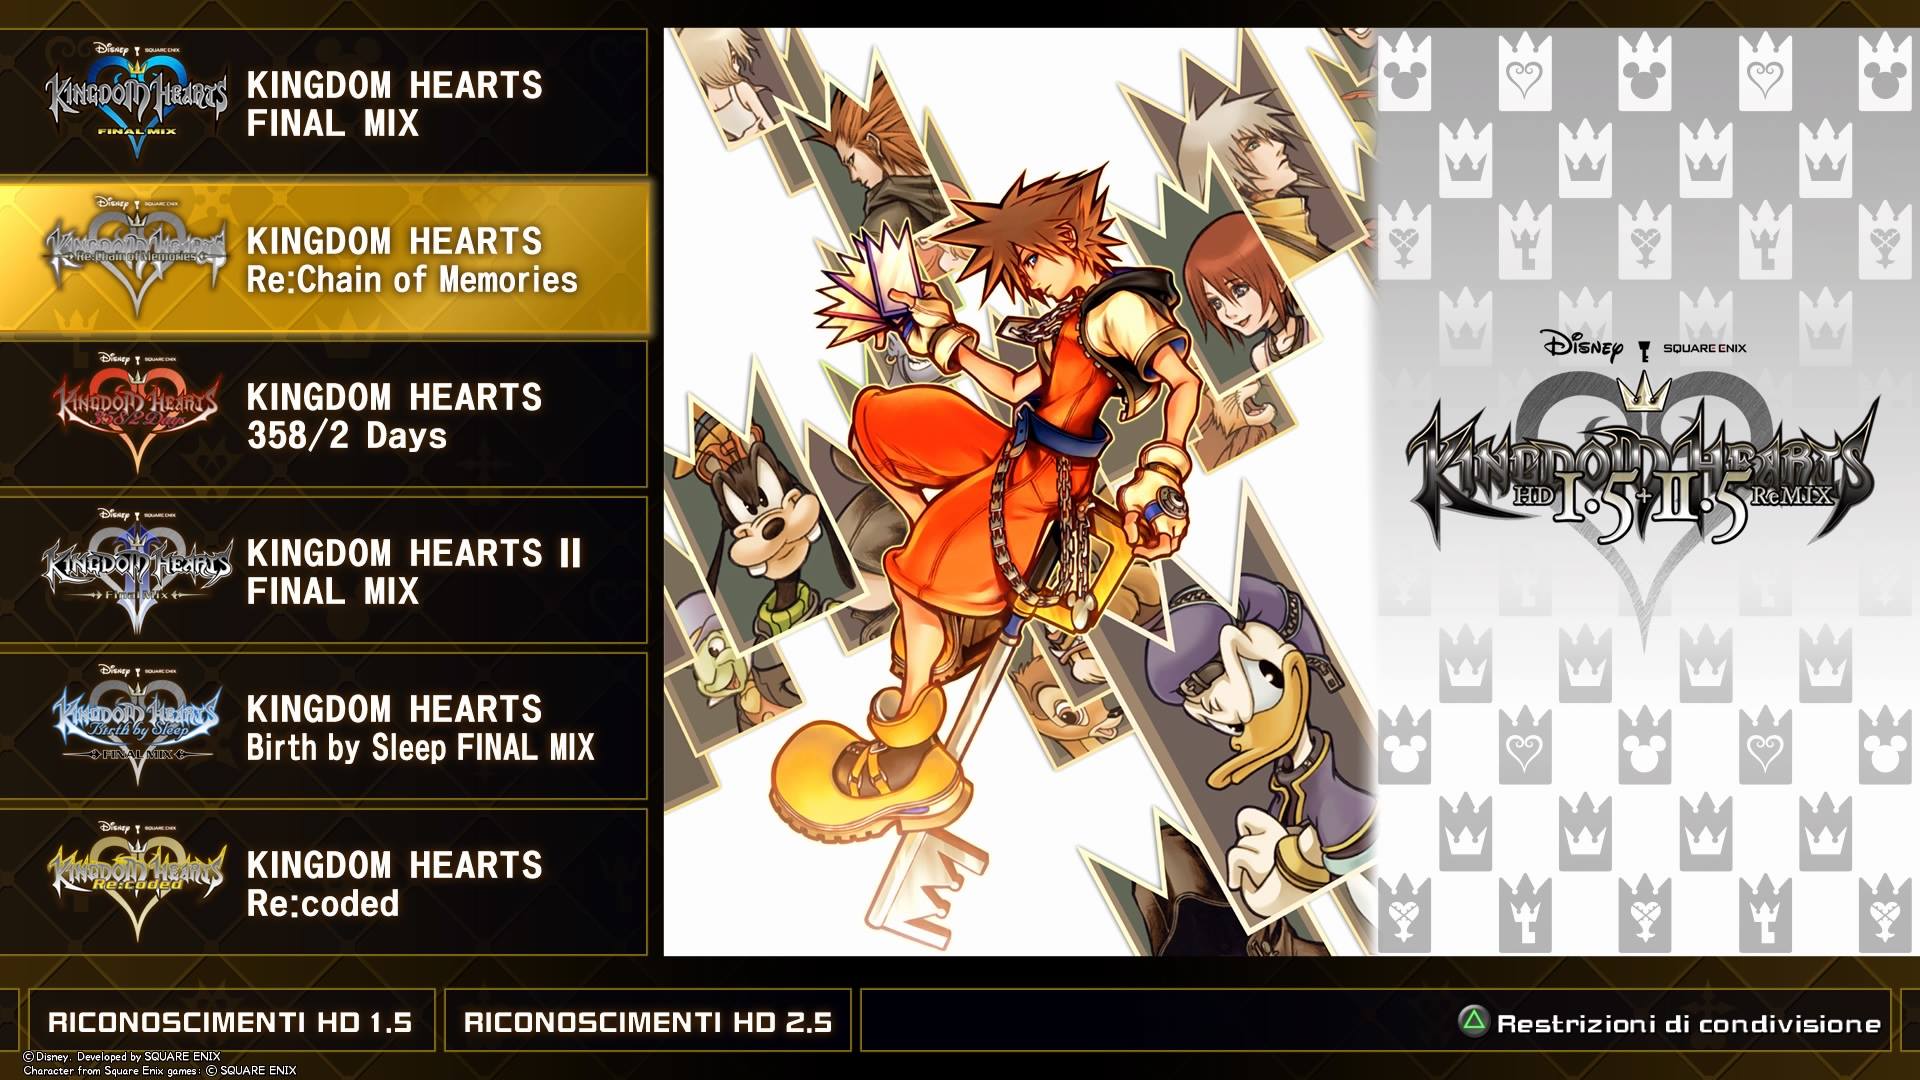 Never Played Kingdom Hearts Before So If I Get Kingdom Hearts 1 5 Remix That Includes Kh1 2 Correct I Tried Researching This But They All Have Different Names Ps4